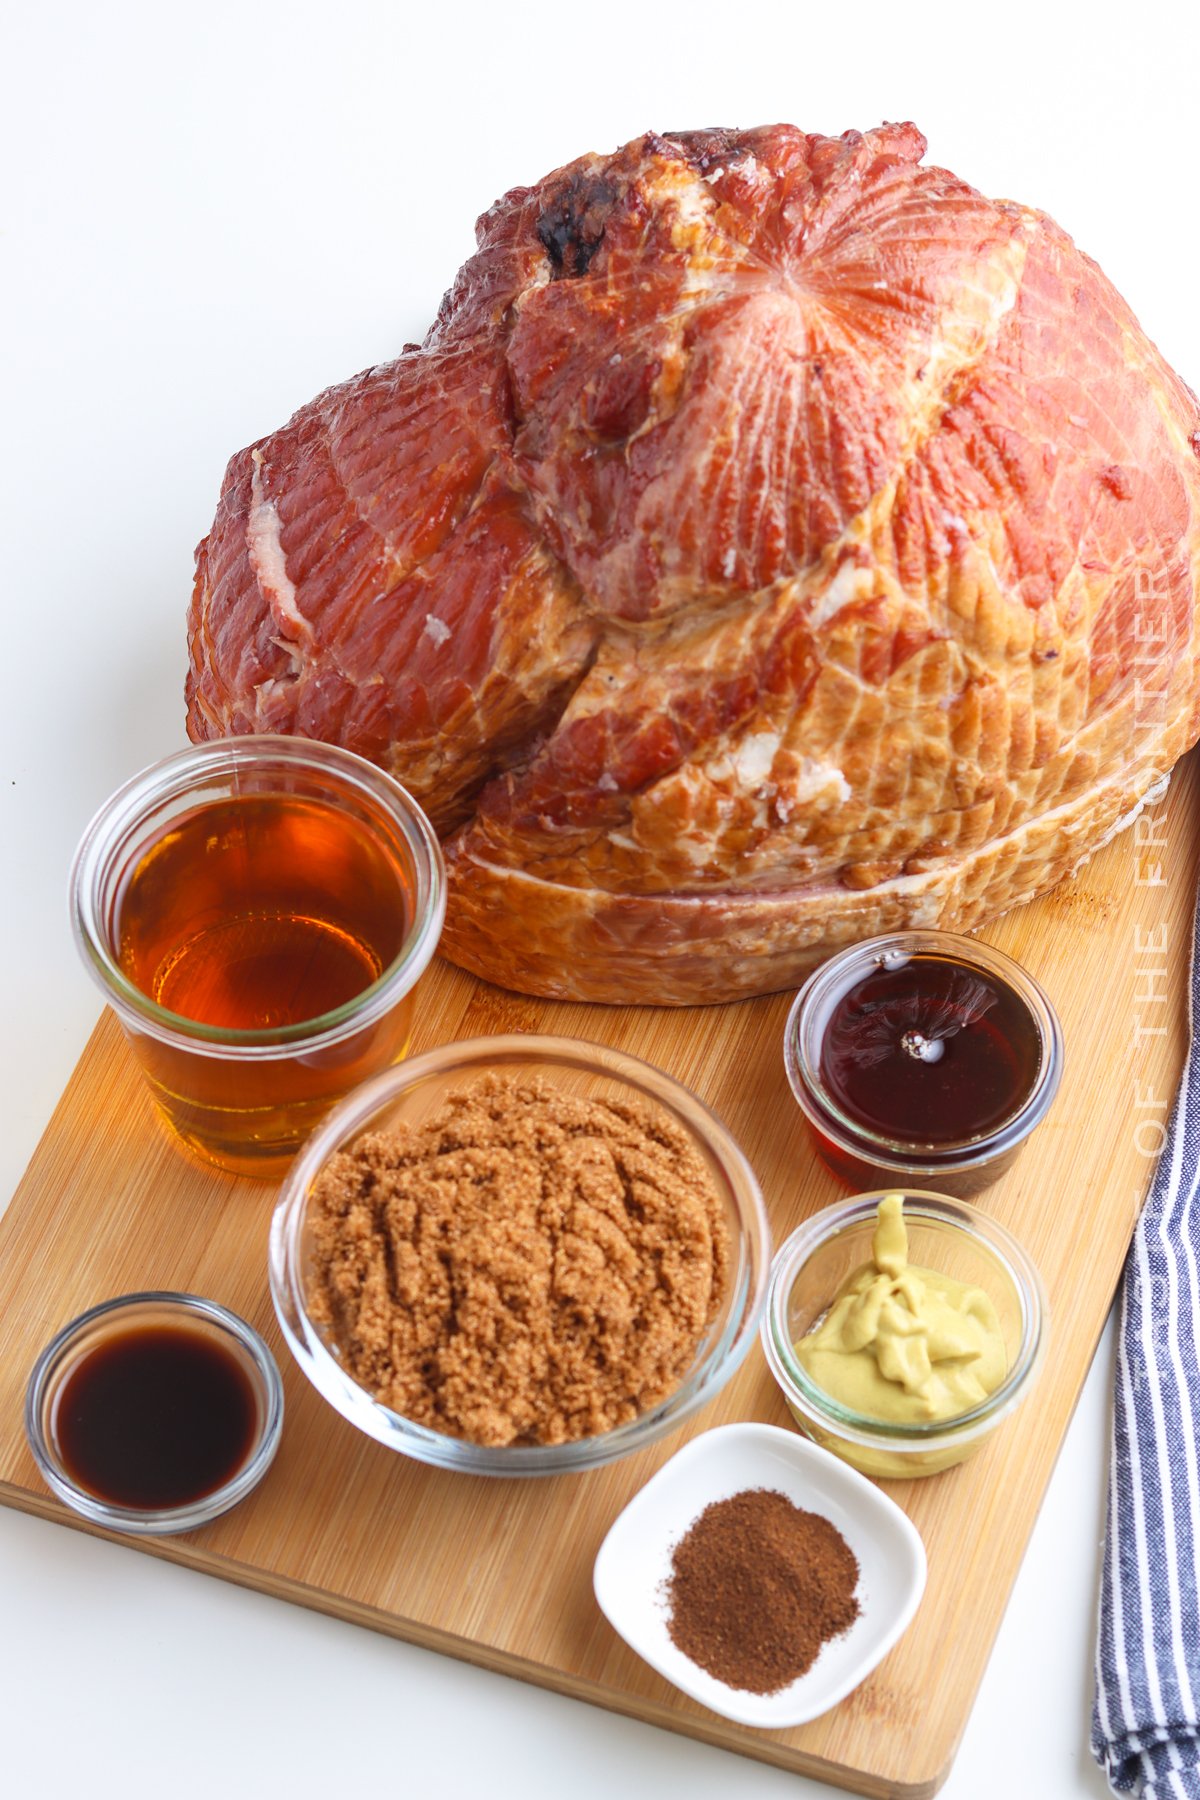 Ingredients for Smoked Ham